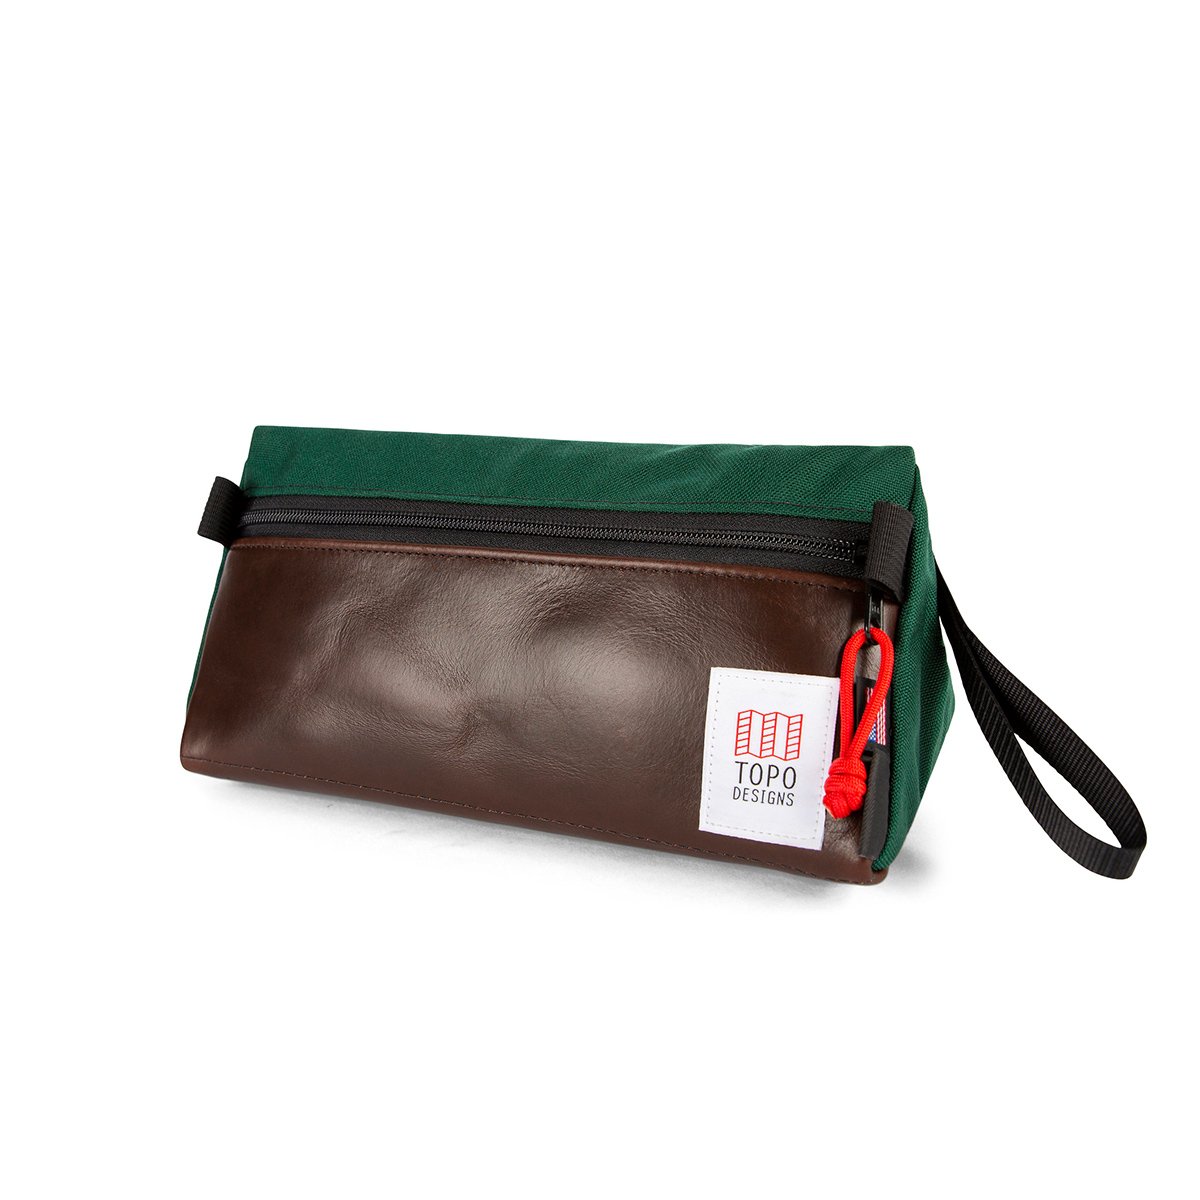 Topo Designs Dopp Kit Heritage Forest/Brown Leather